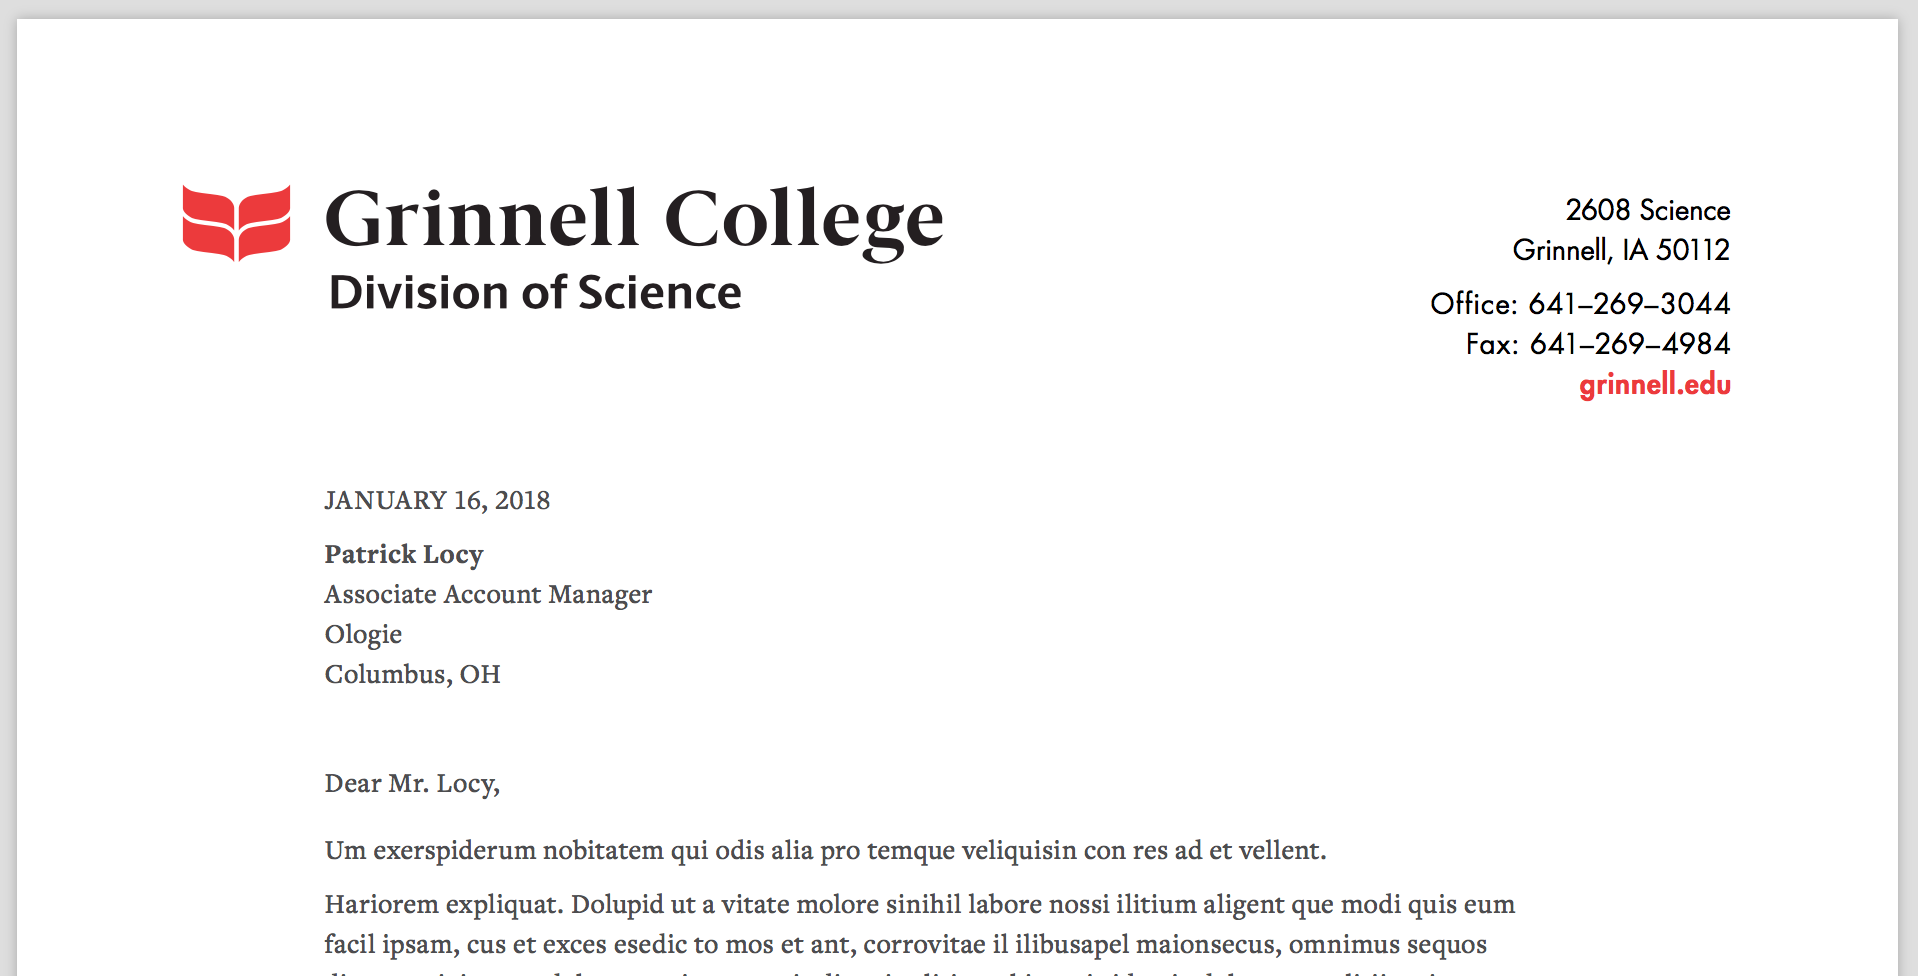 The start of a letter that illustrates the Grinnell letterhead.